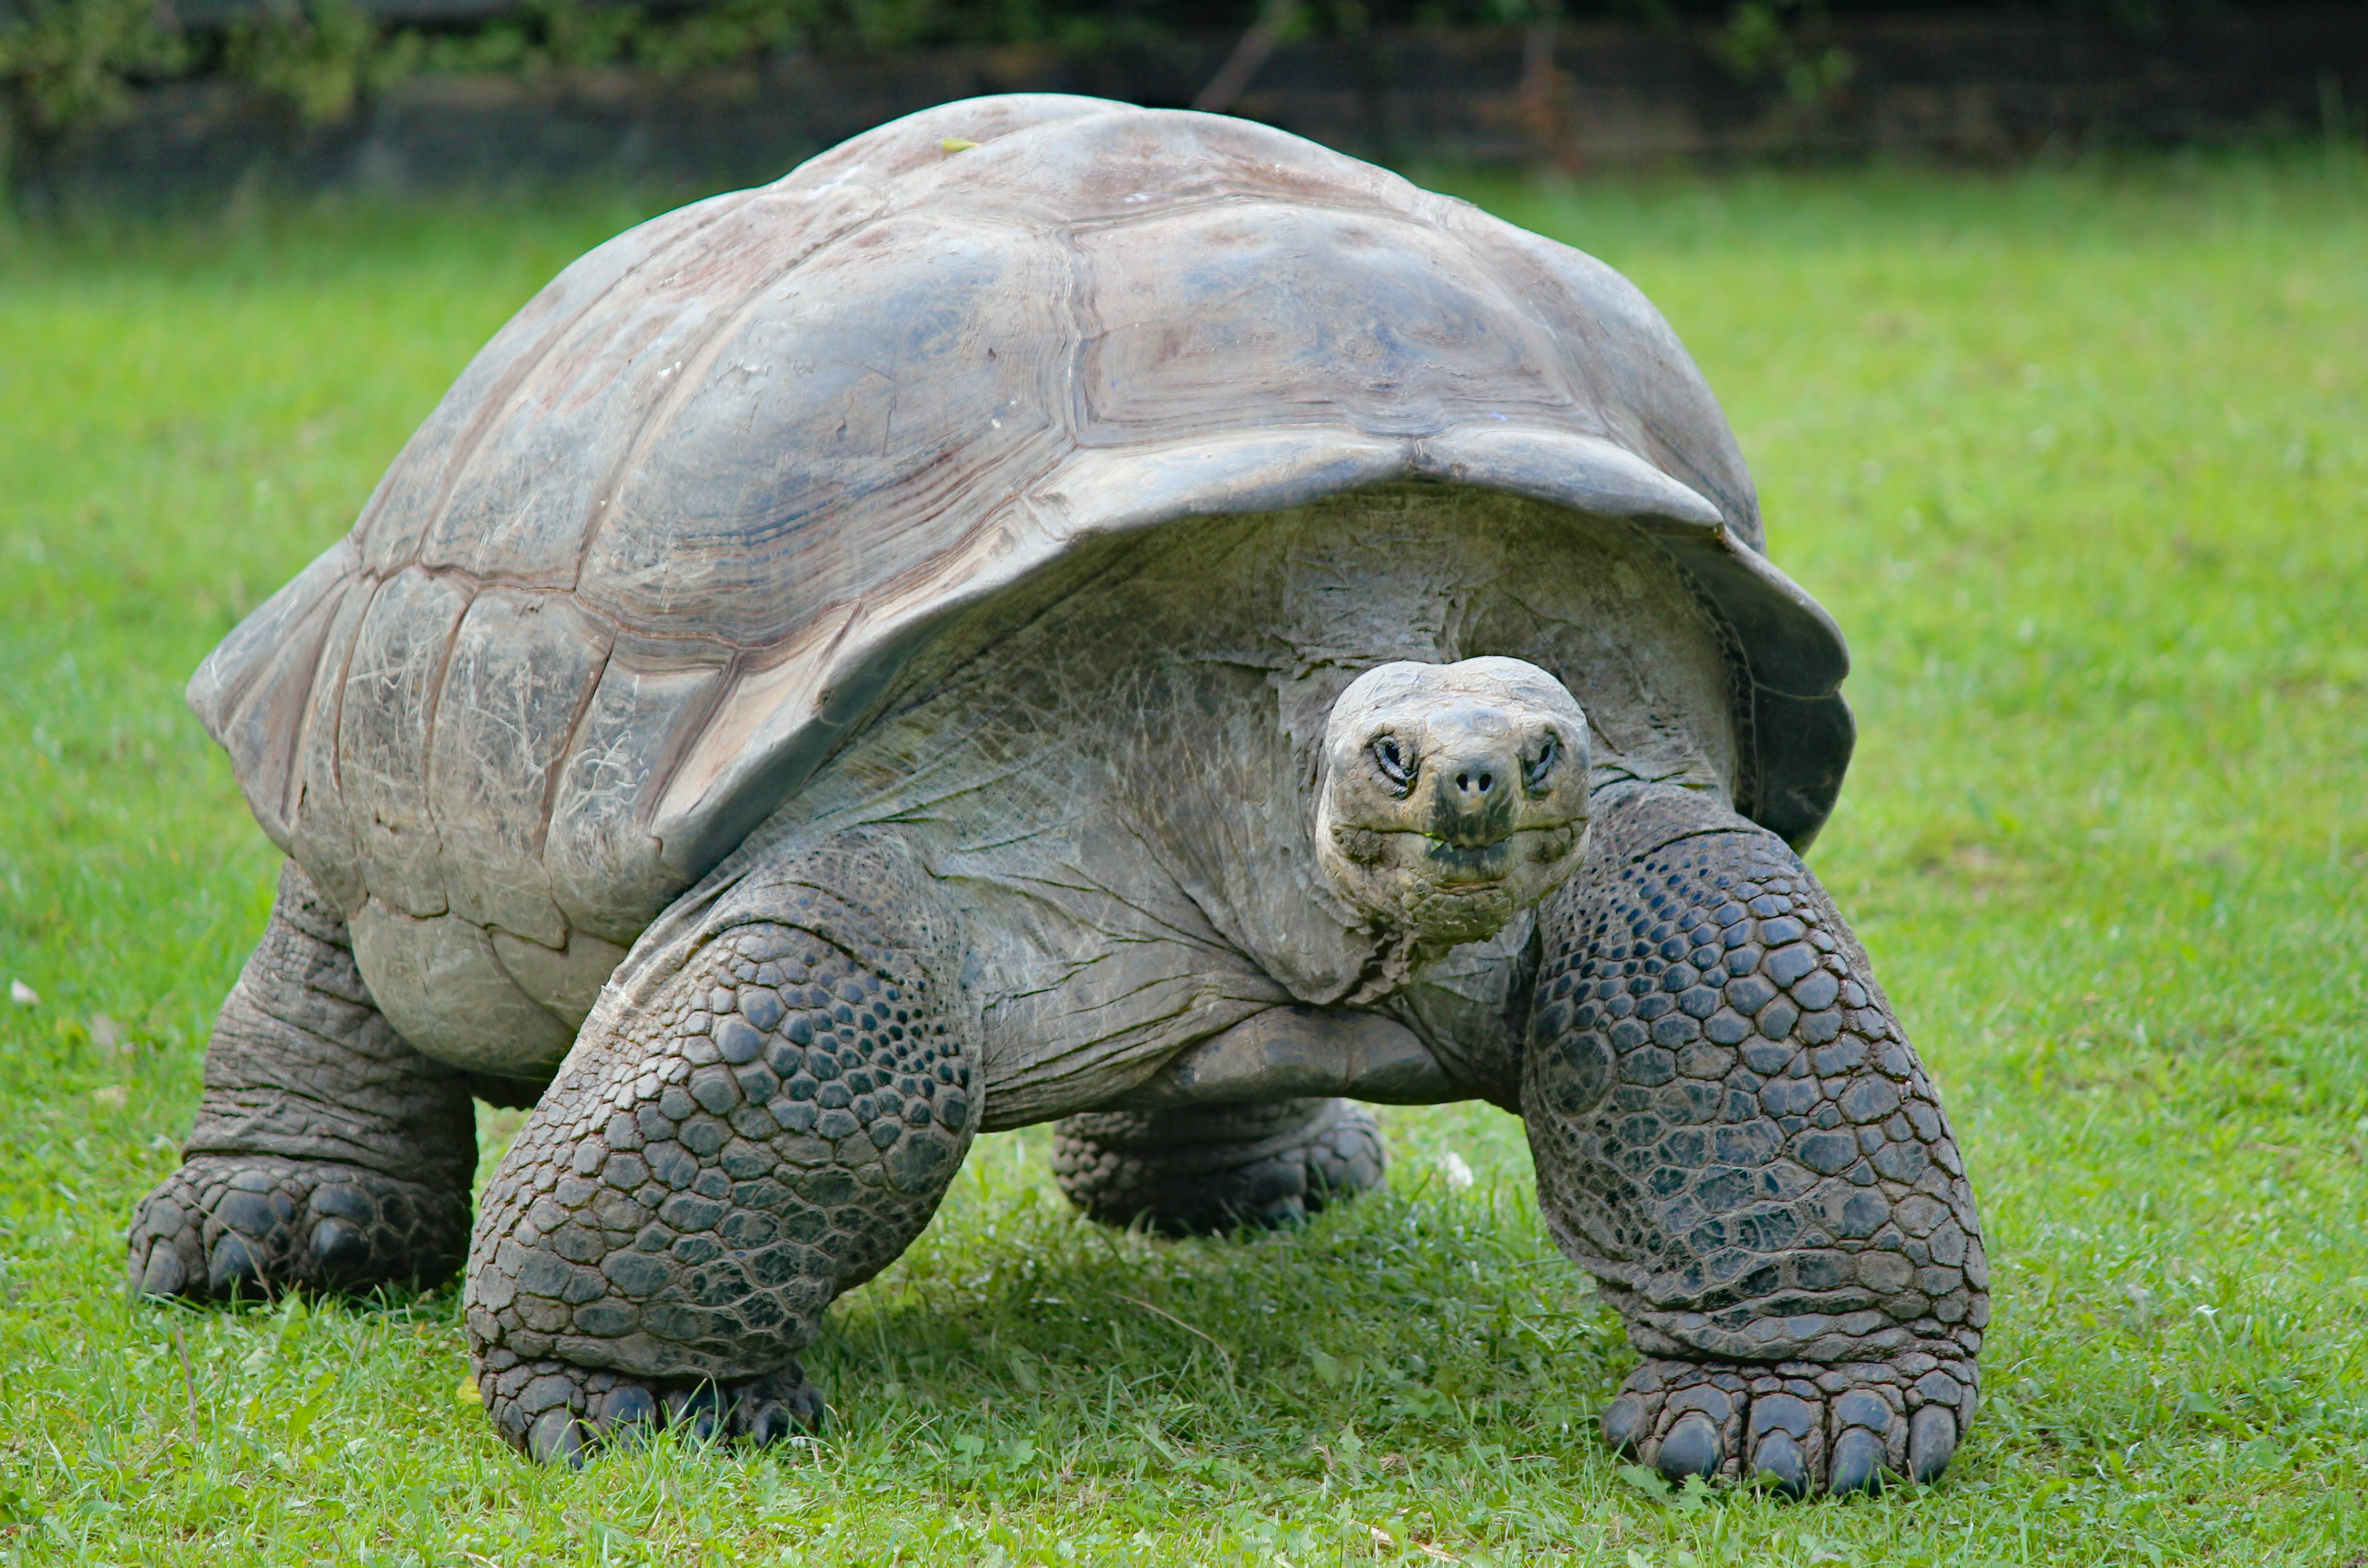 Tortoises and turtles – up to 255 years